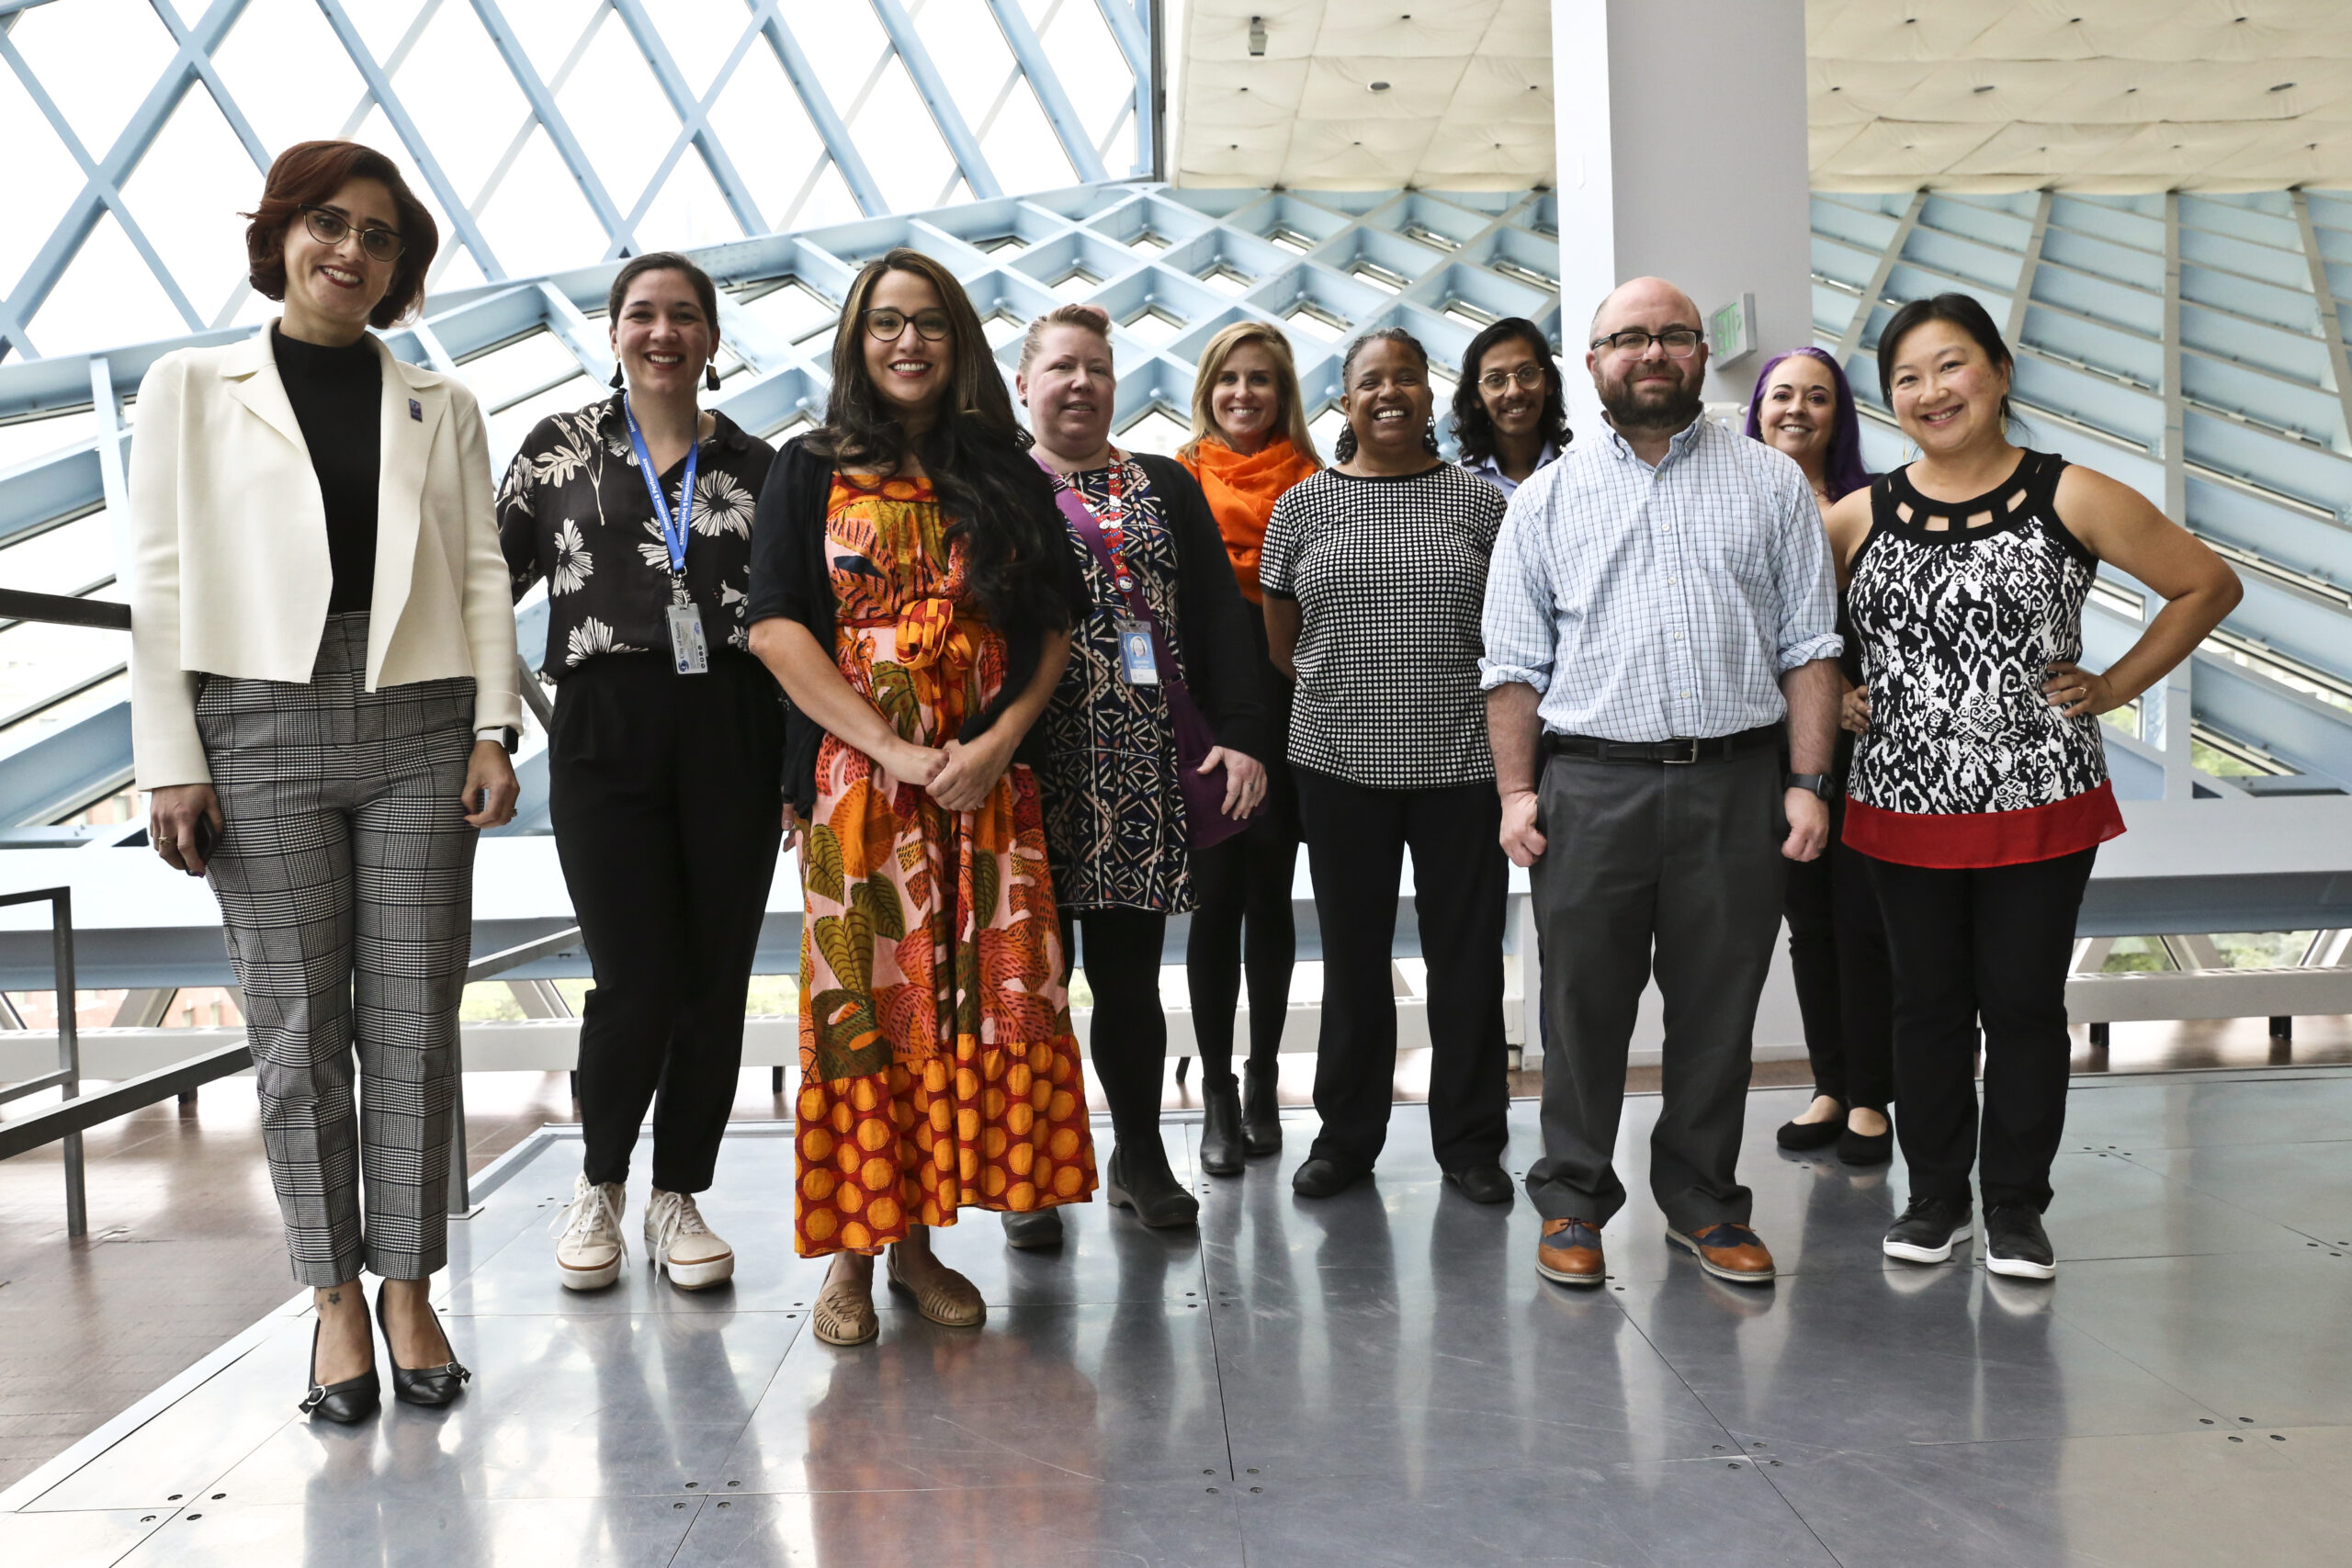 A group of ten people standing together and smiling in the downtown Seattle Public Library building